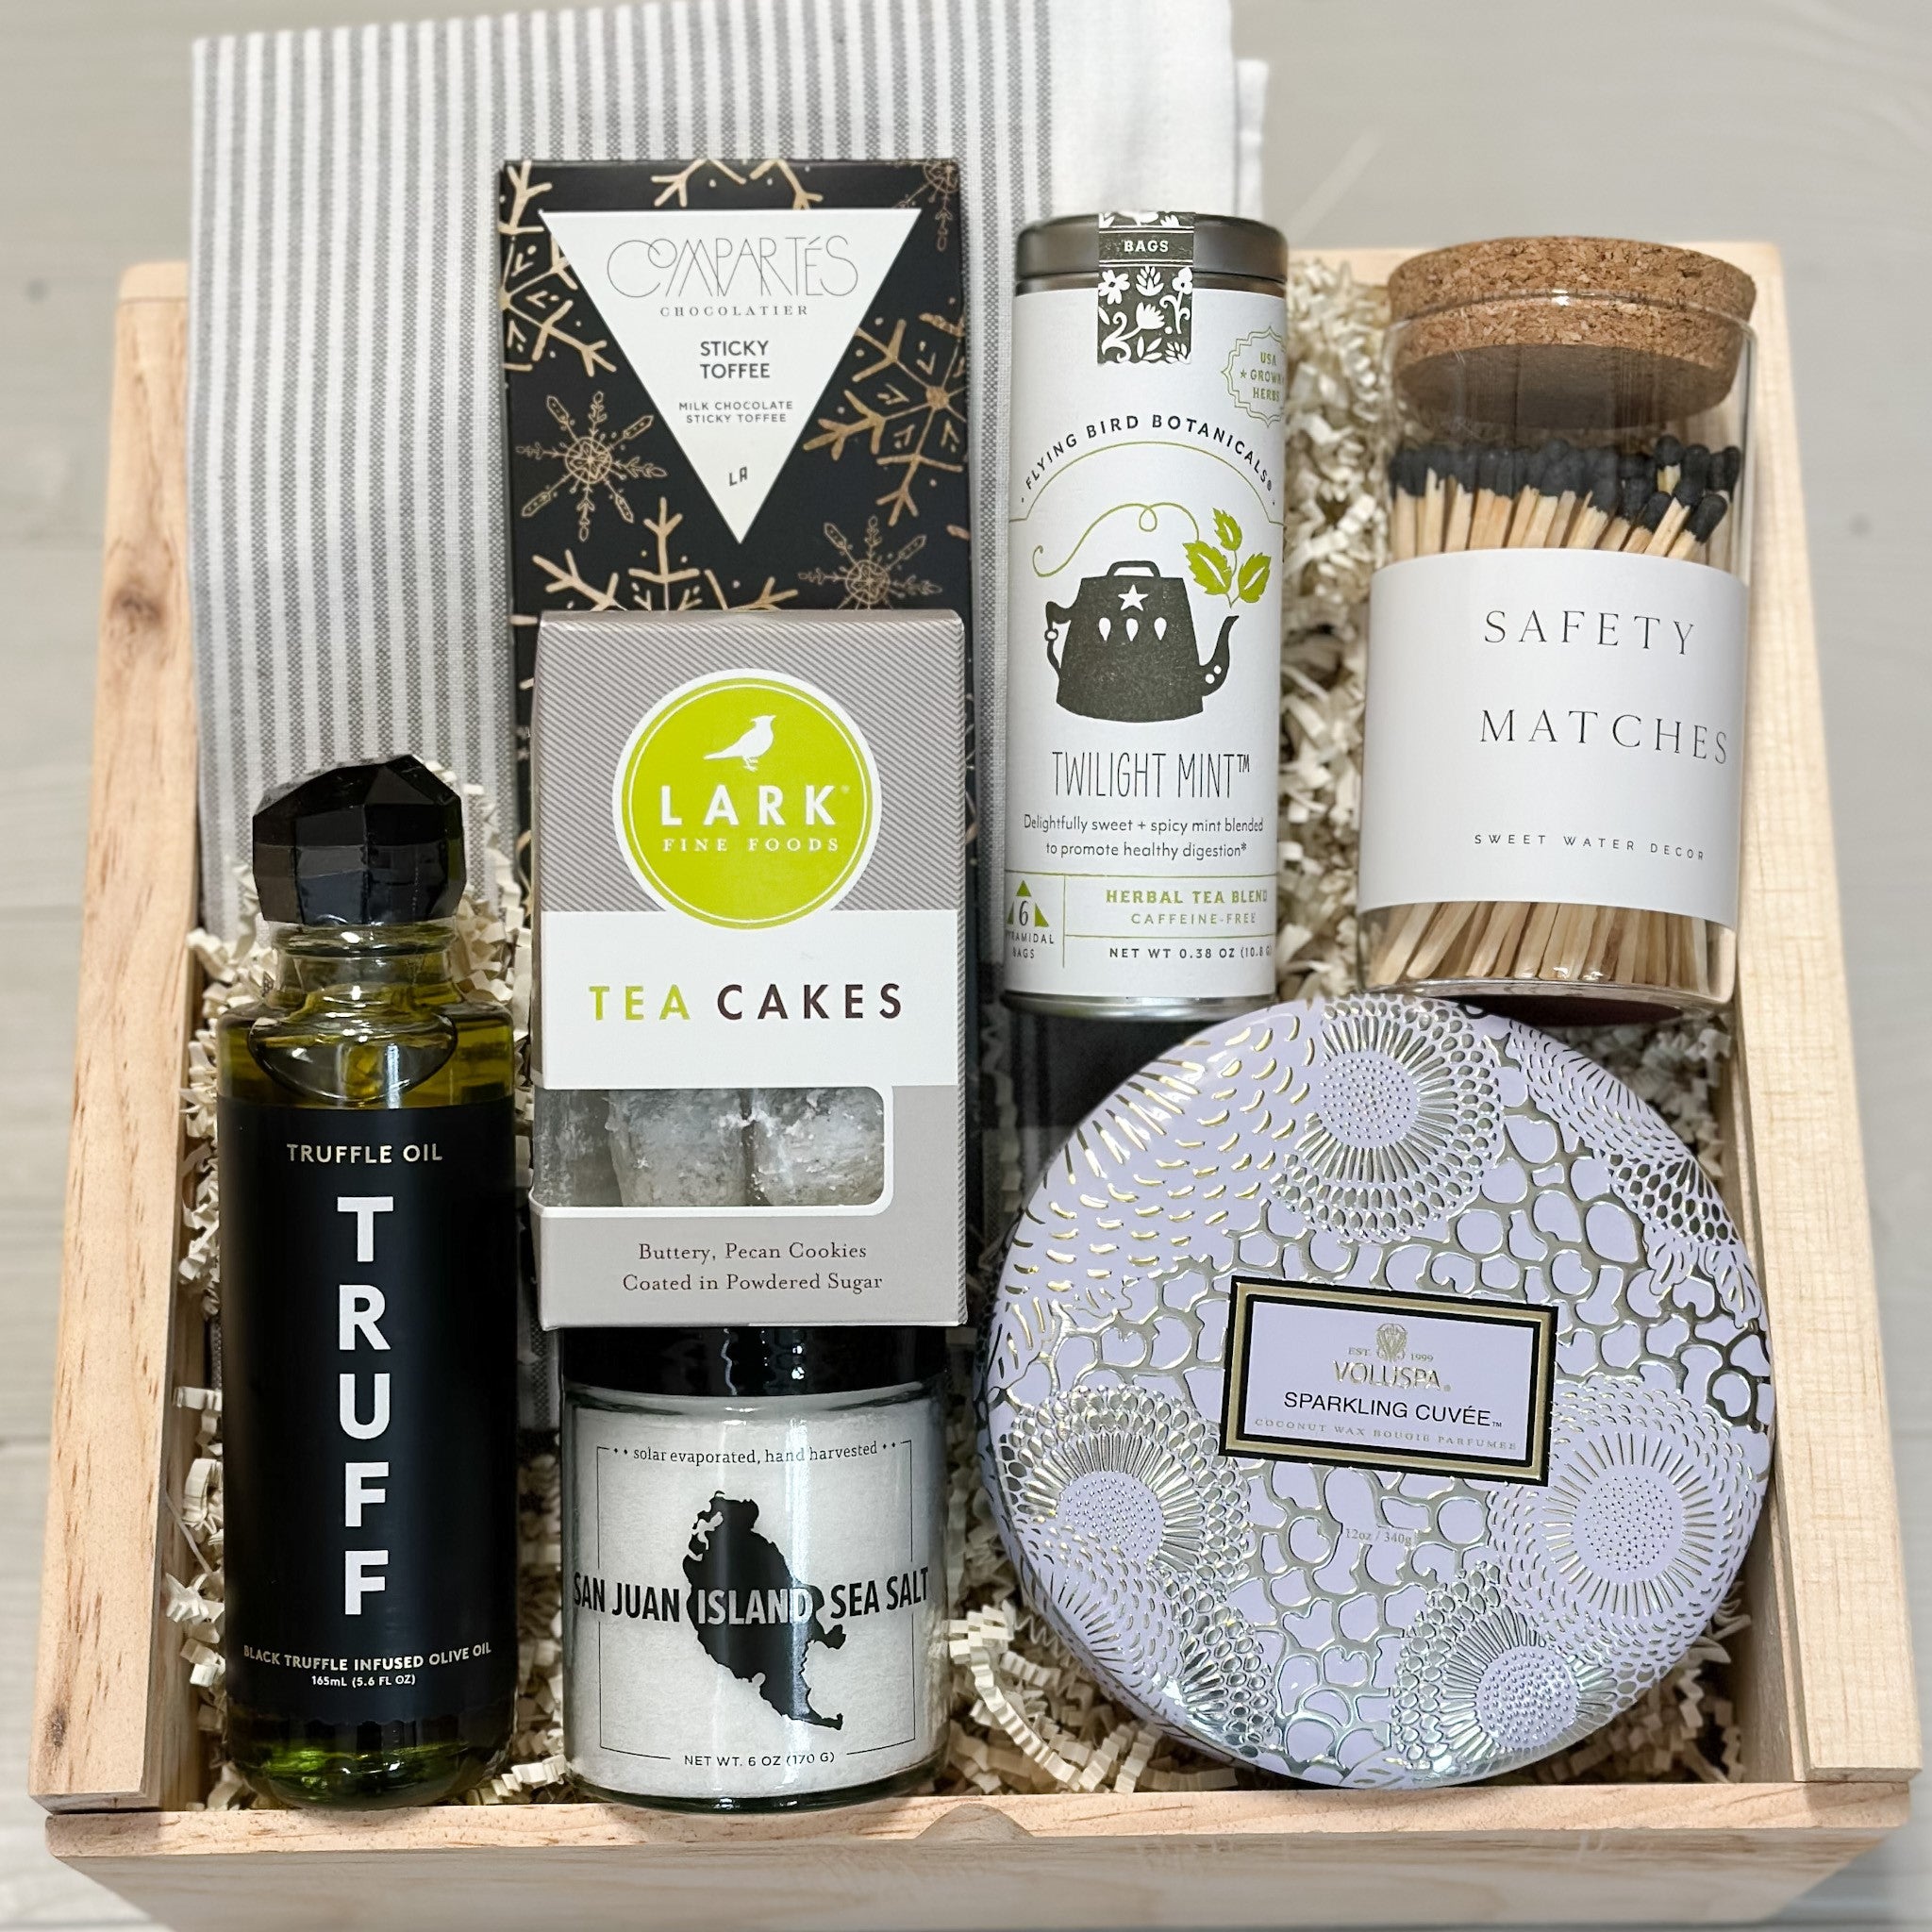 home sweet home gift basket includes truffle oil, salt, candle, matches, chocolate, tea, cookies, dish towel